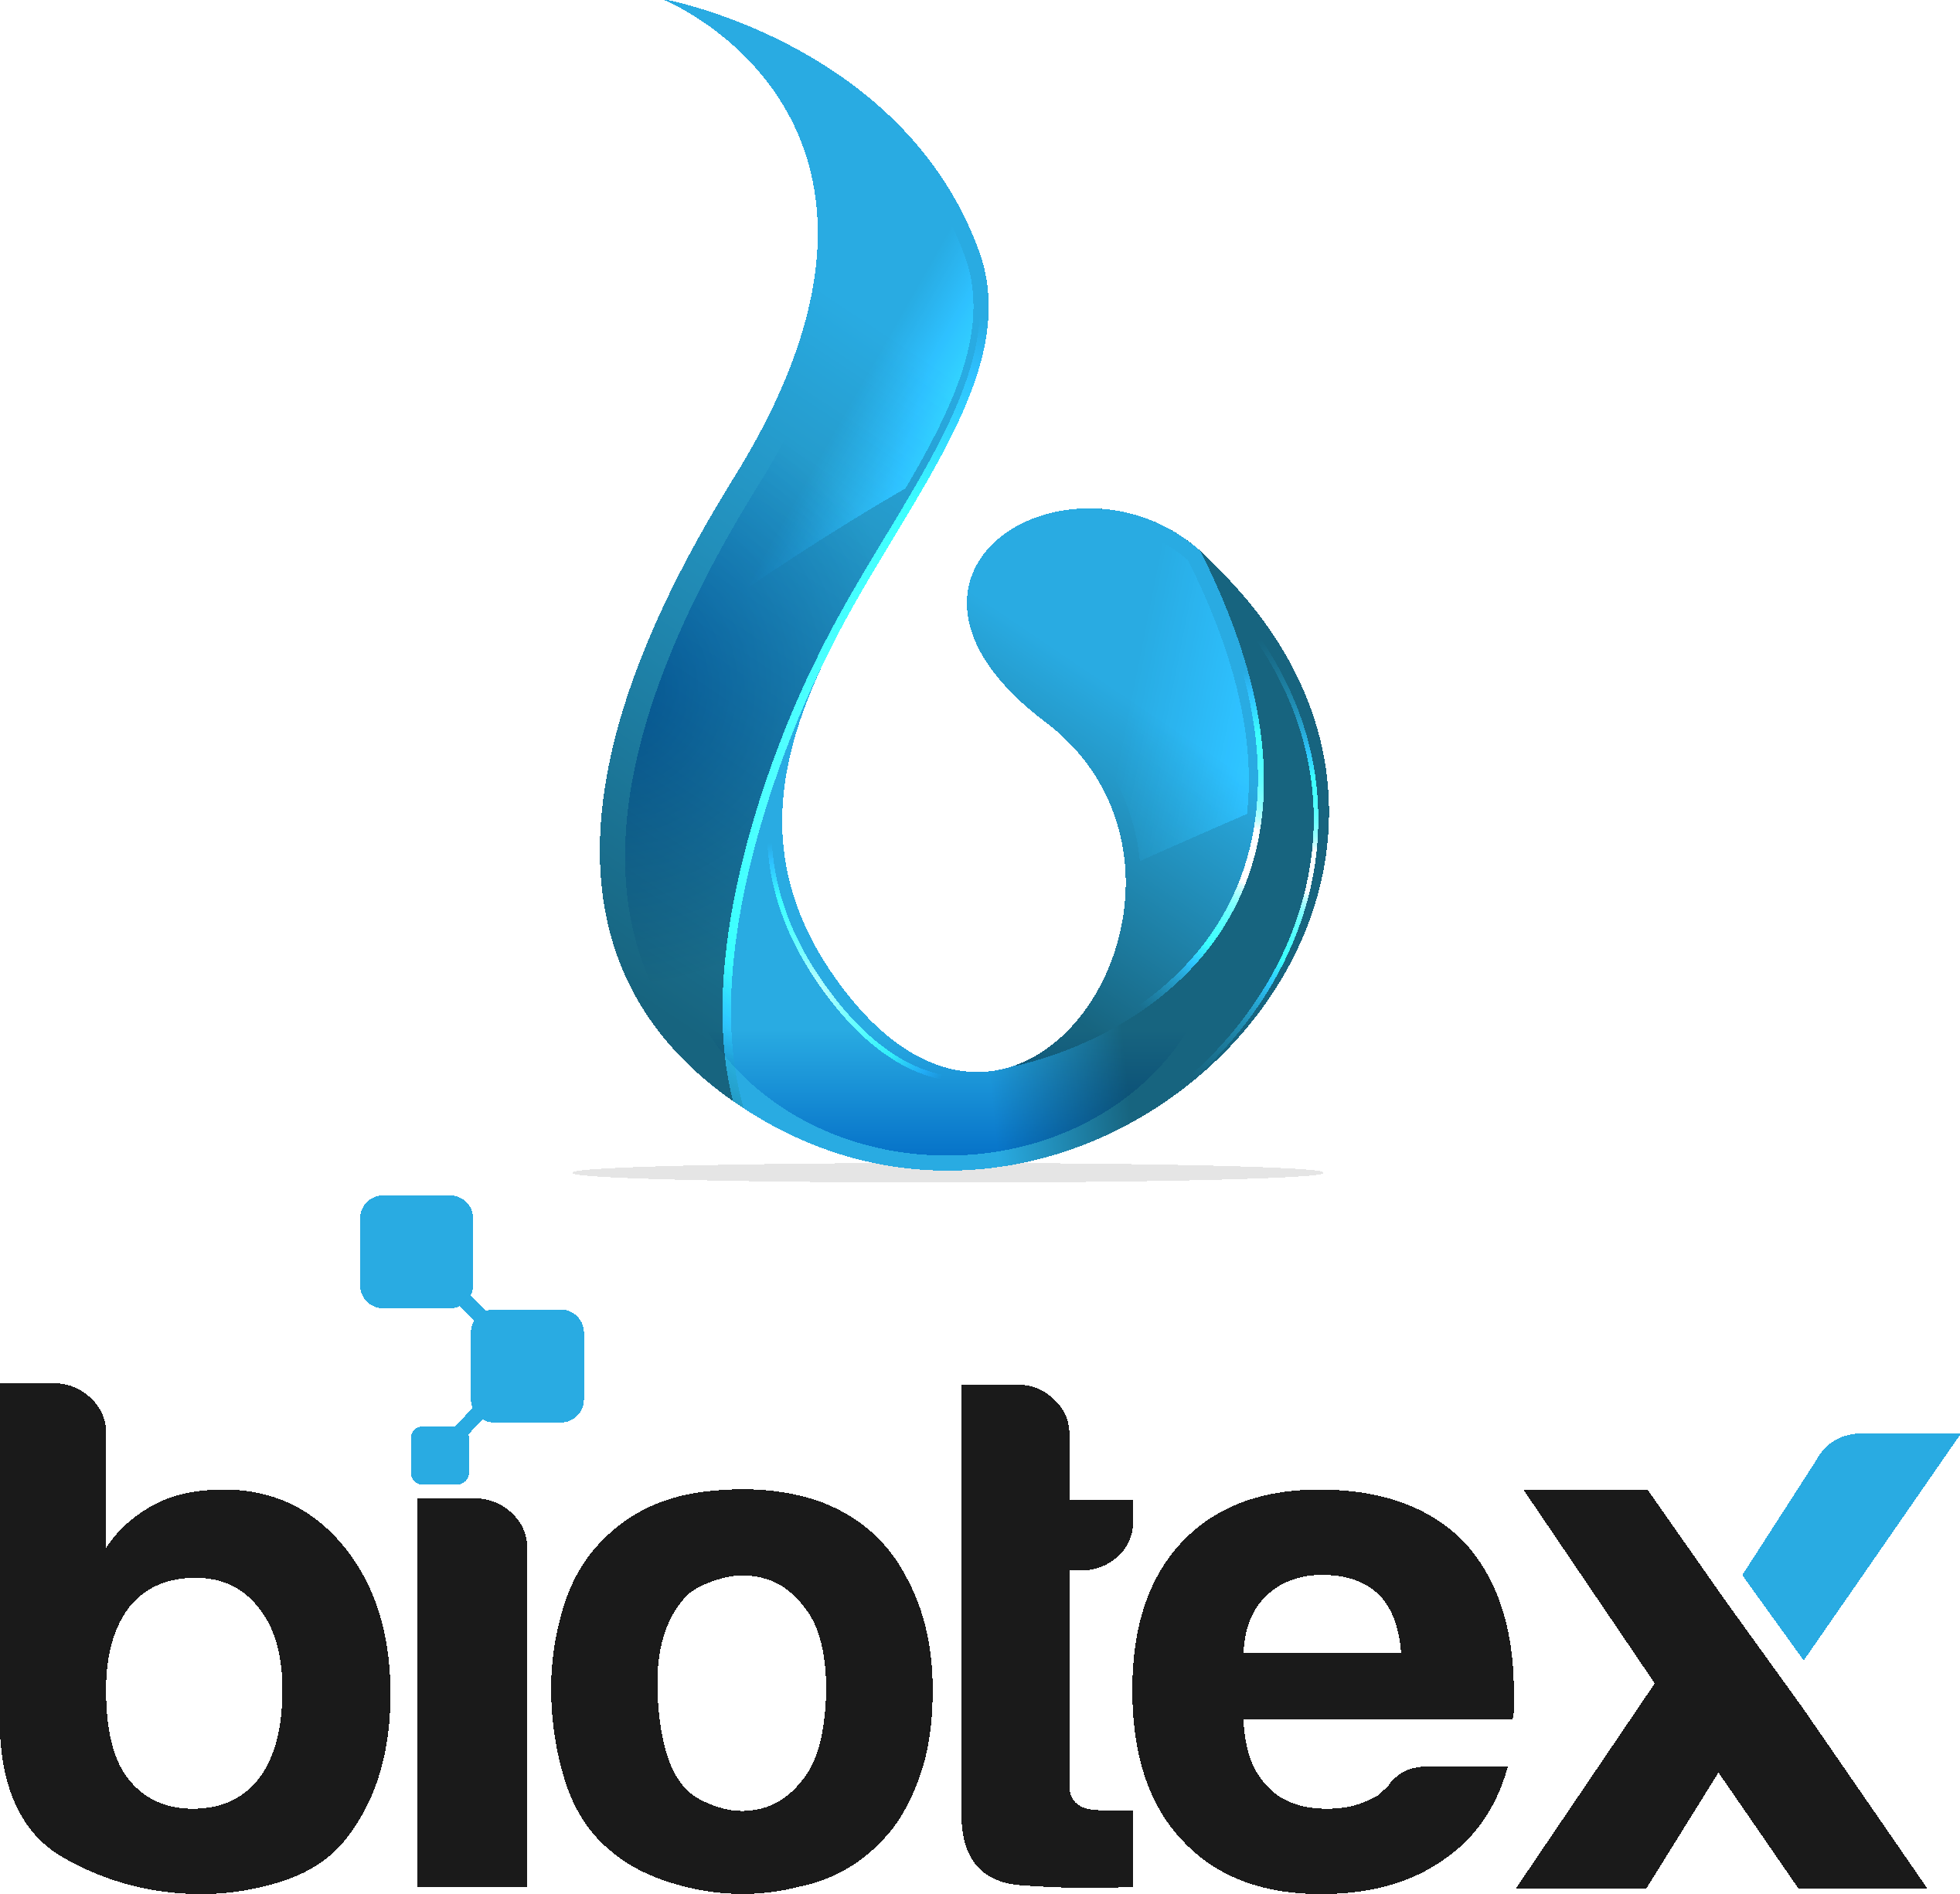 Copy of Biotexpng